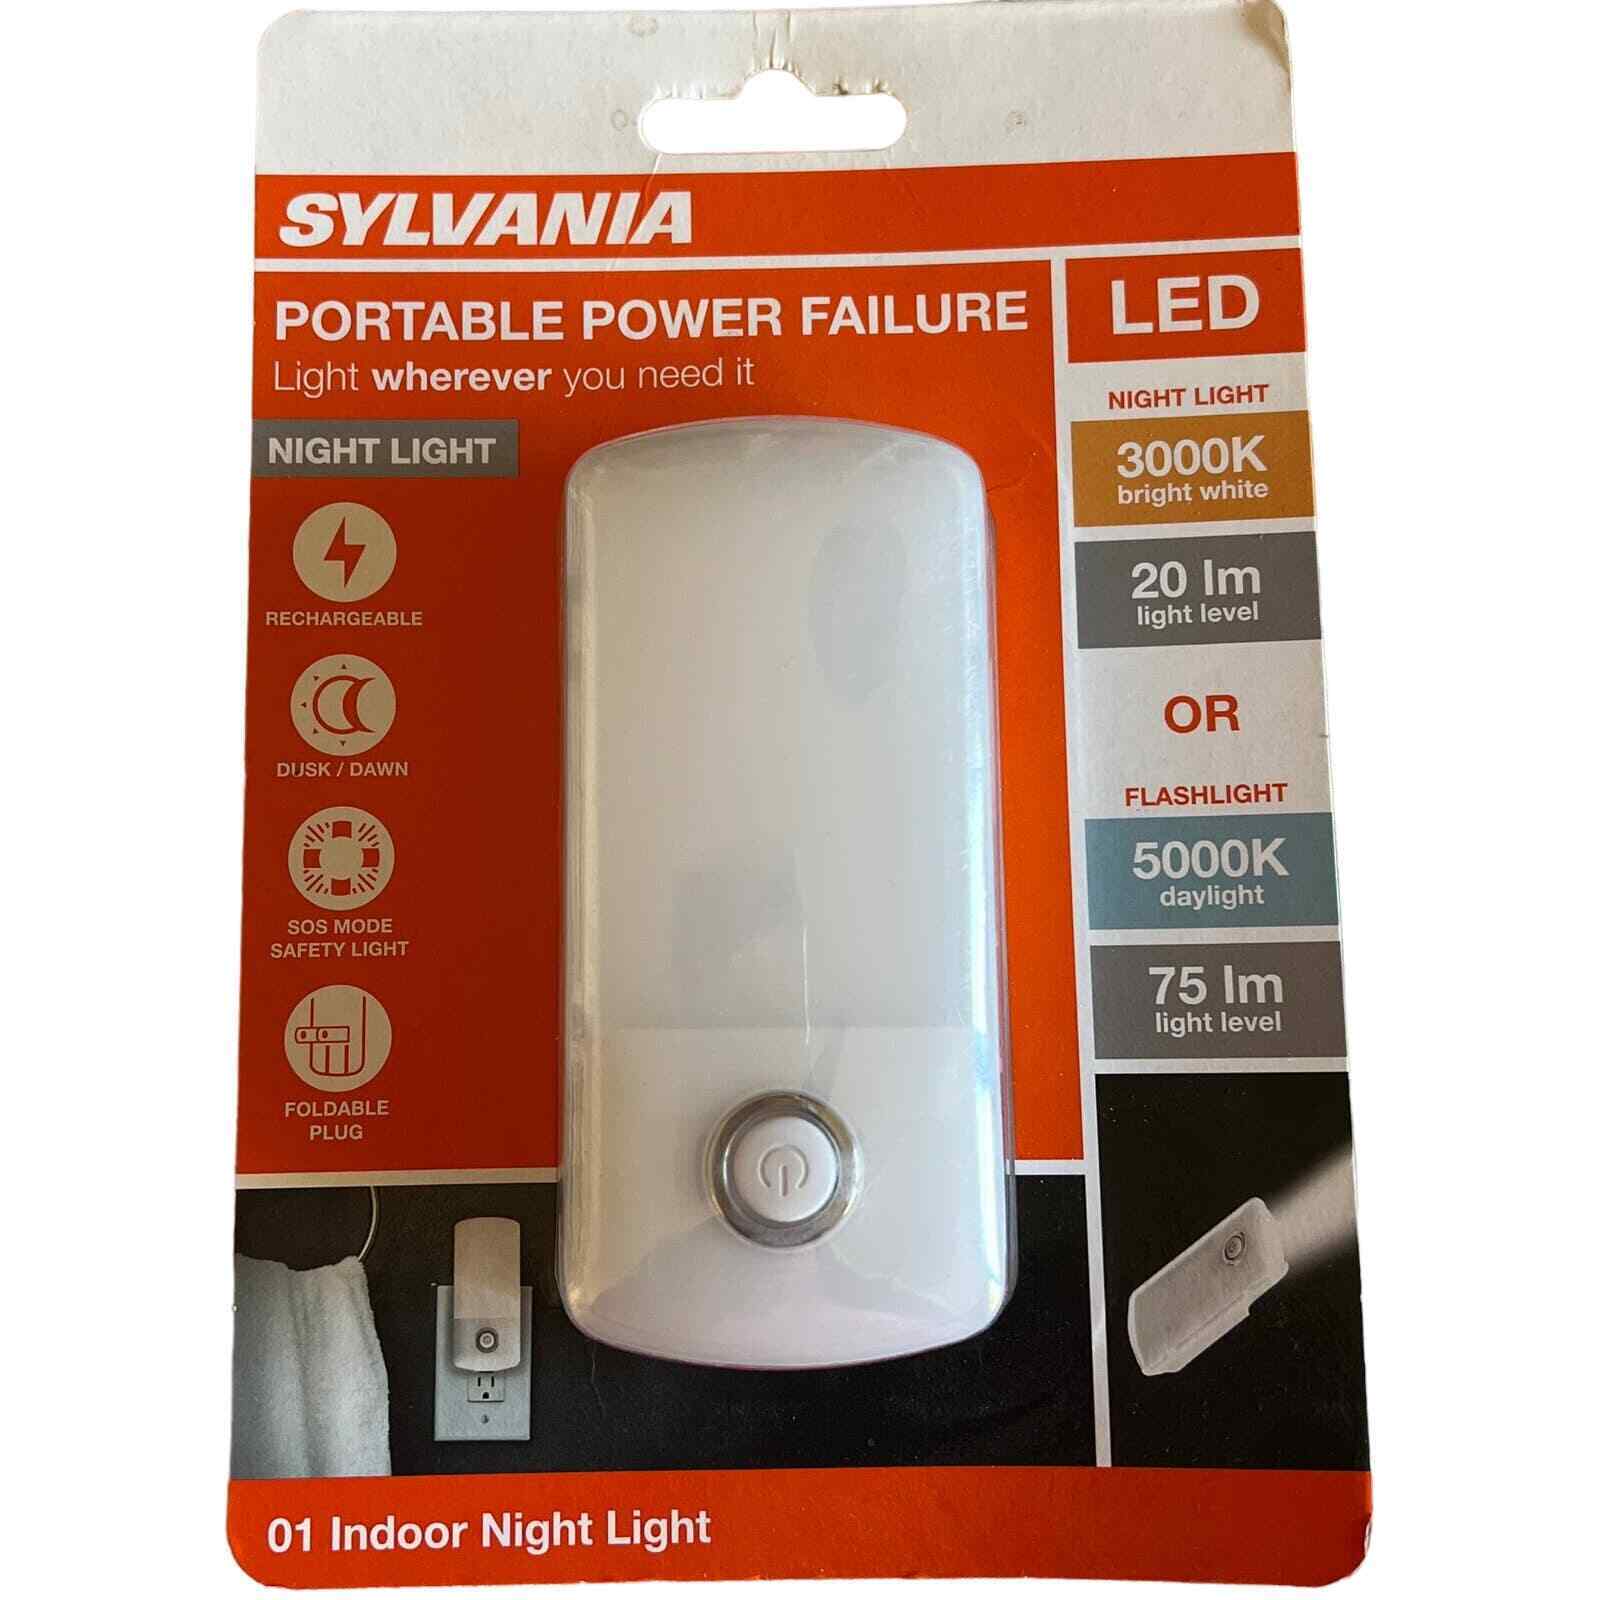 Sylvania LED 3 in 1 Power Failure Rechargeable Night Light Flash Light